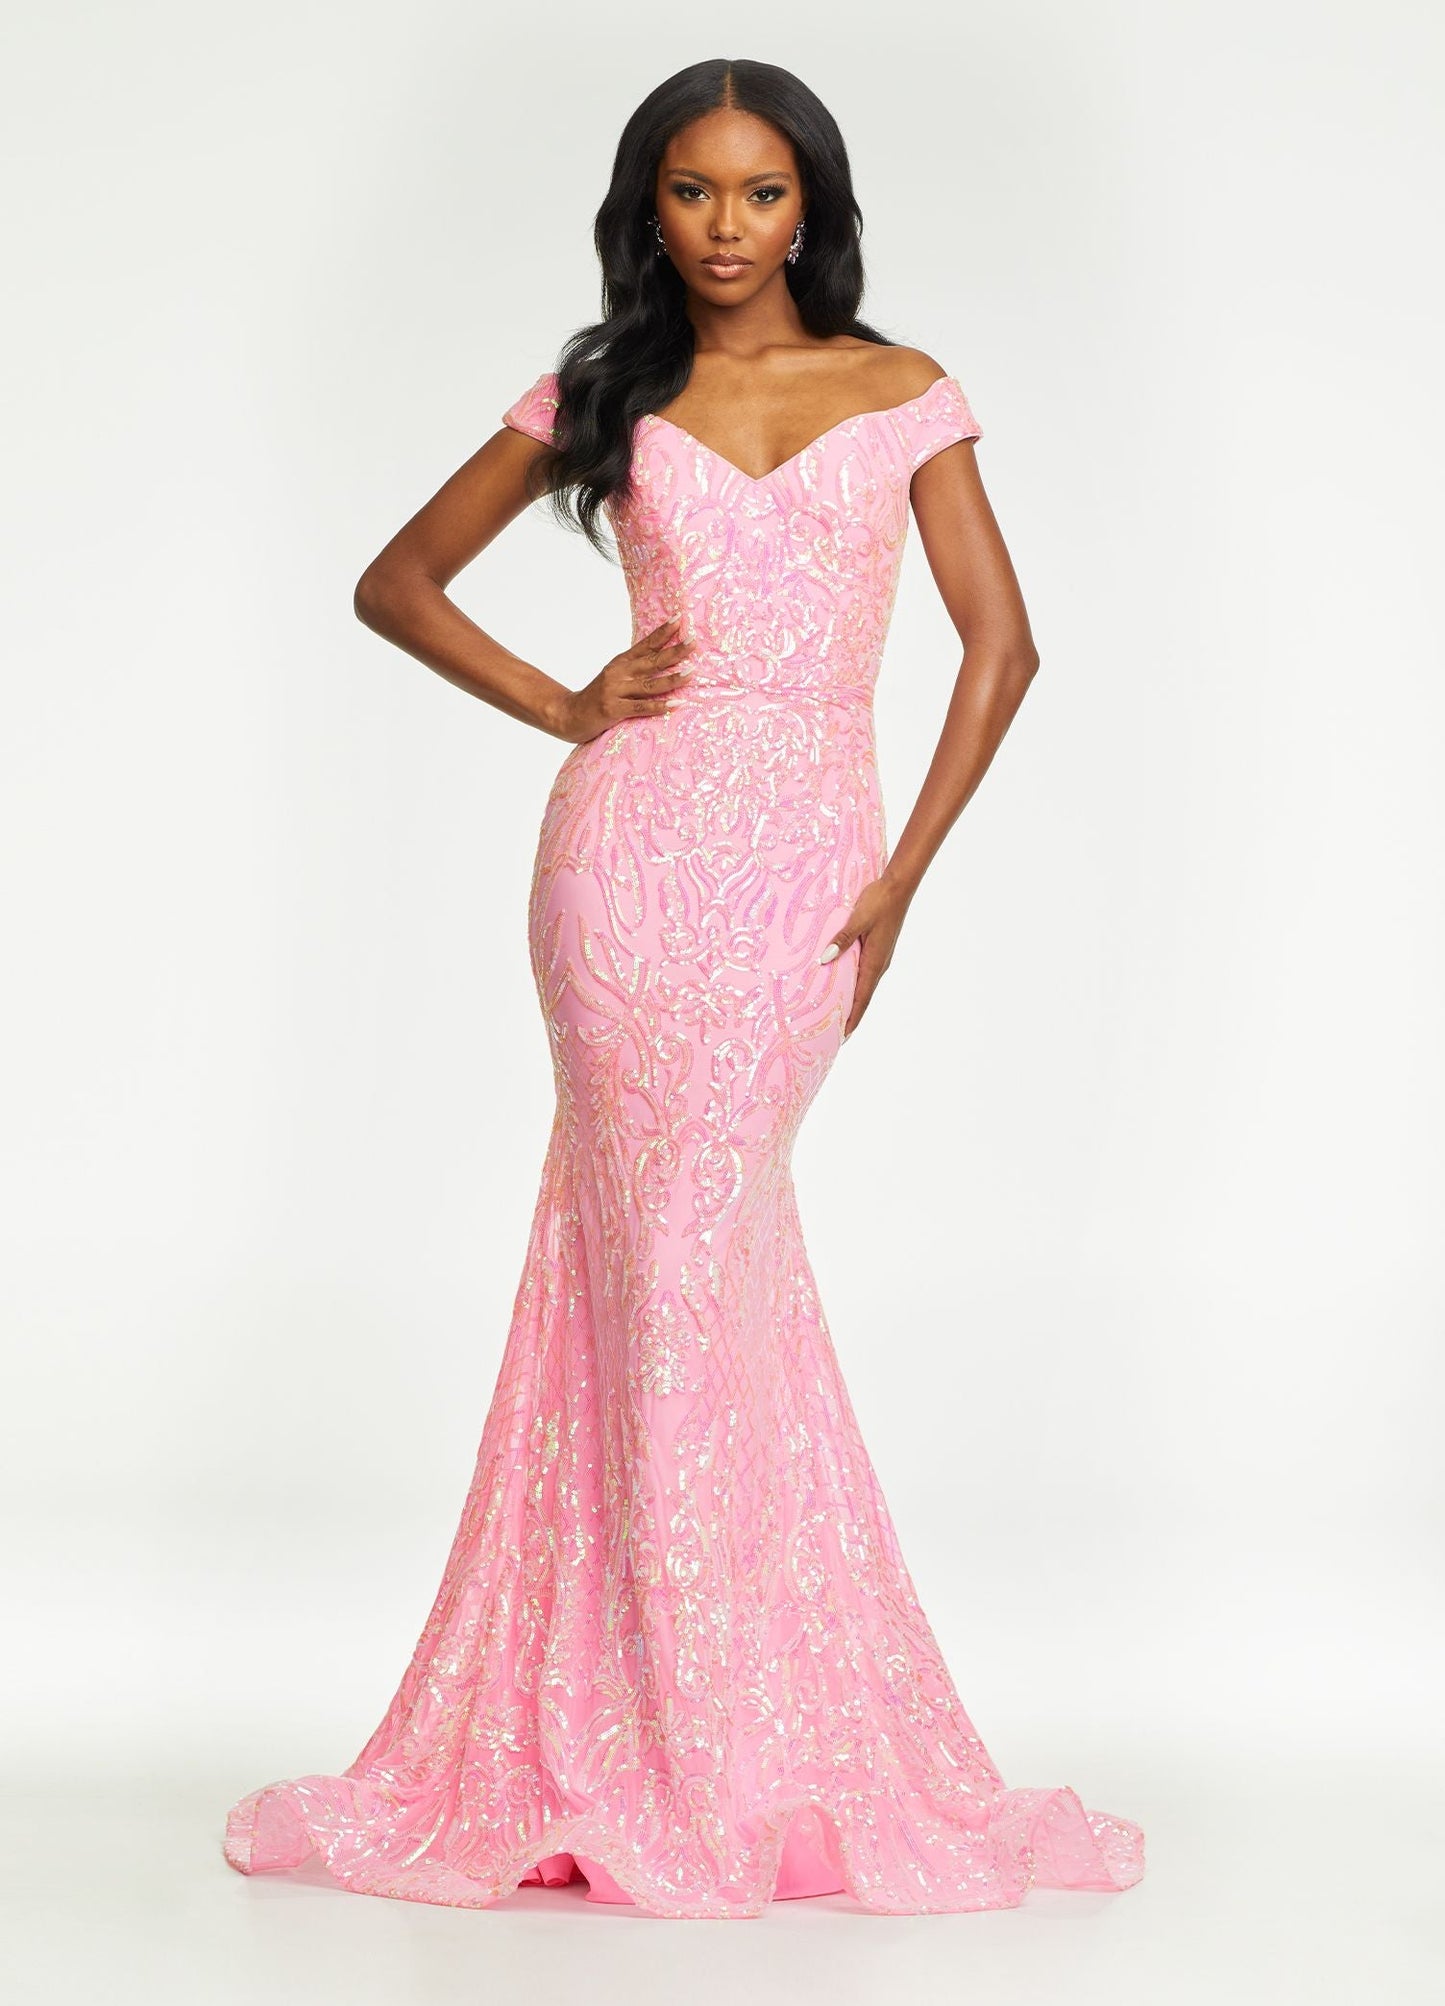 Ashley Lauren 11112 Size 2 Baby Pink Prom Dress Off the Shoulder Stretch Sequin Gown